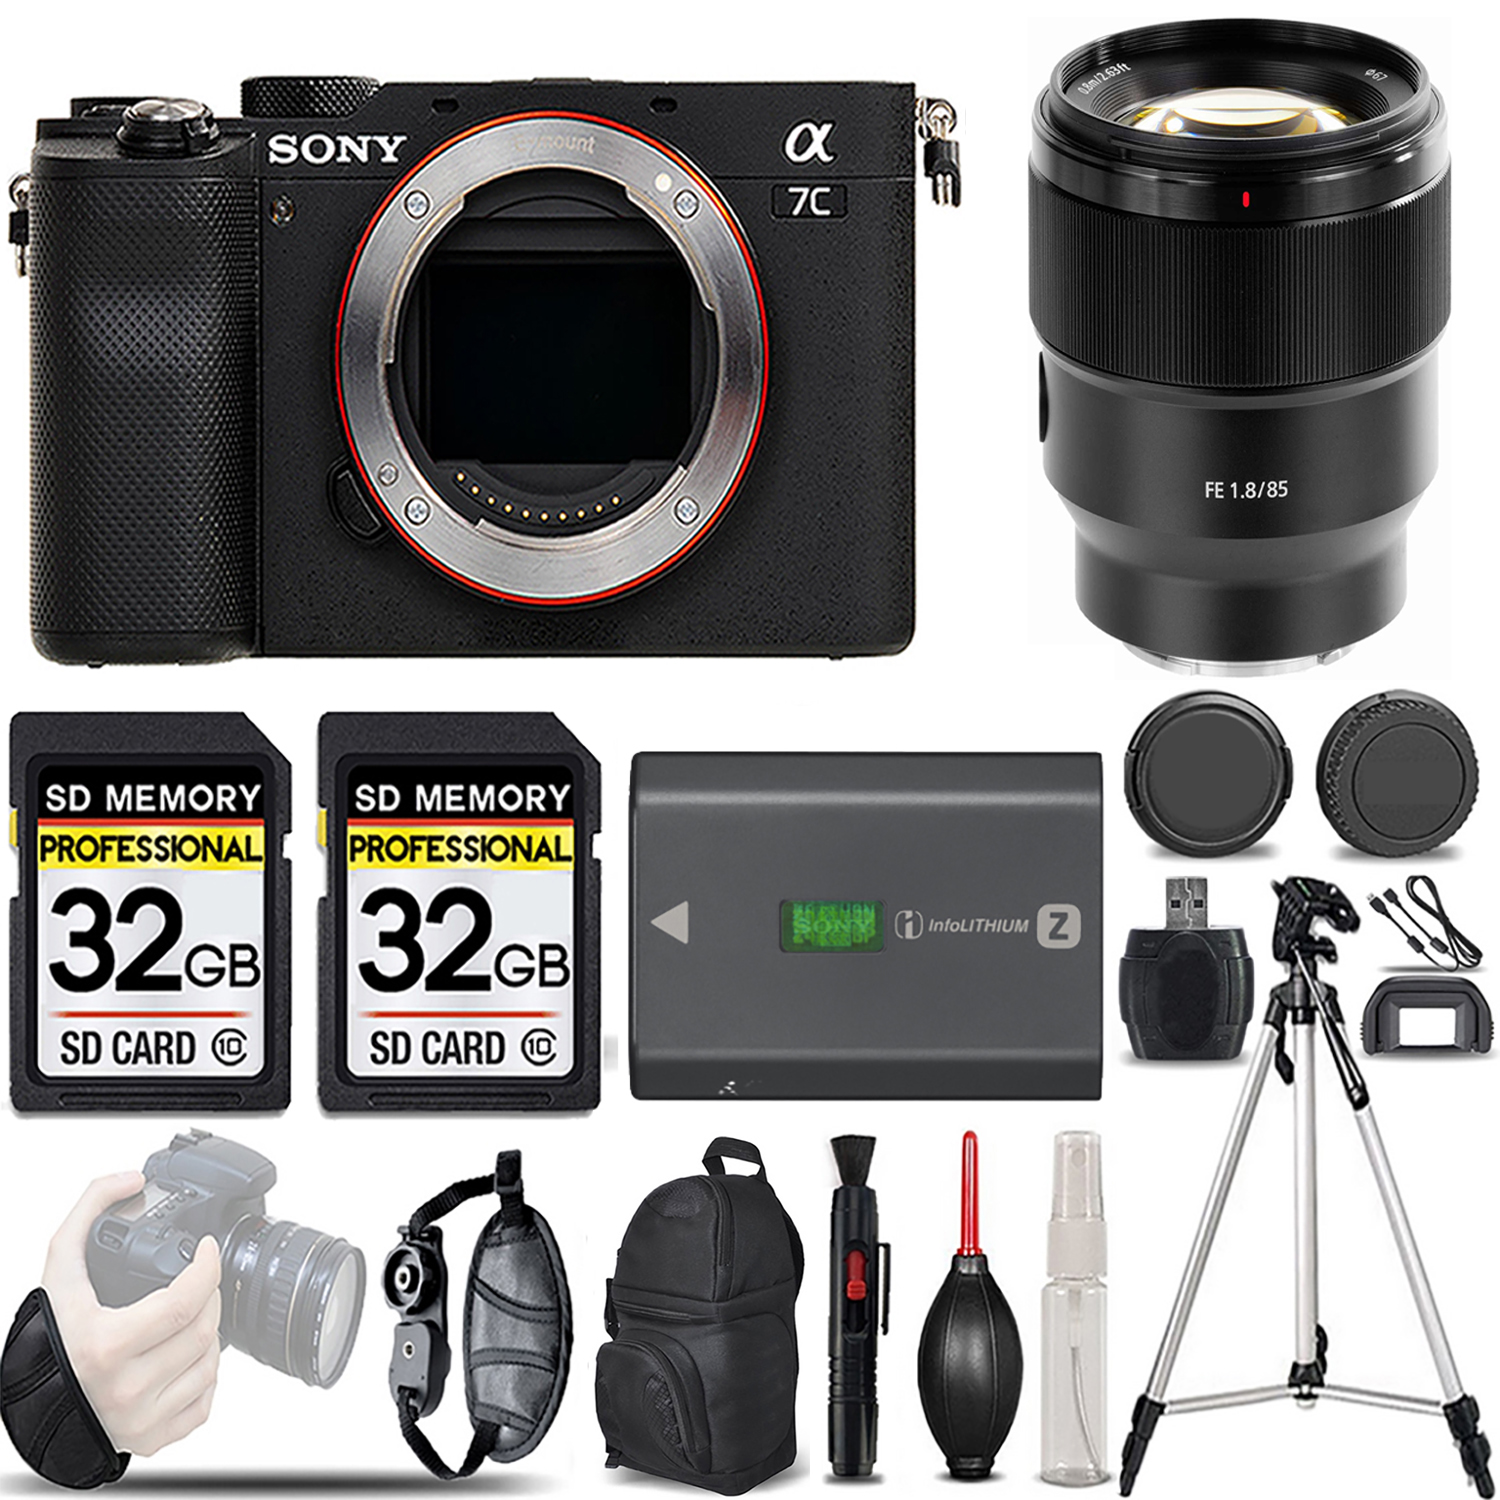 Alpha a7C Camera (Silver) + 85mm f/1.8 Lens + Extra Battery + 64GB -Basic Kit *FREE SHIPPING*